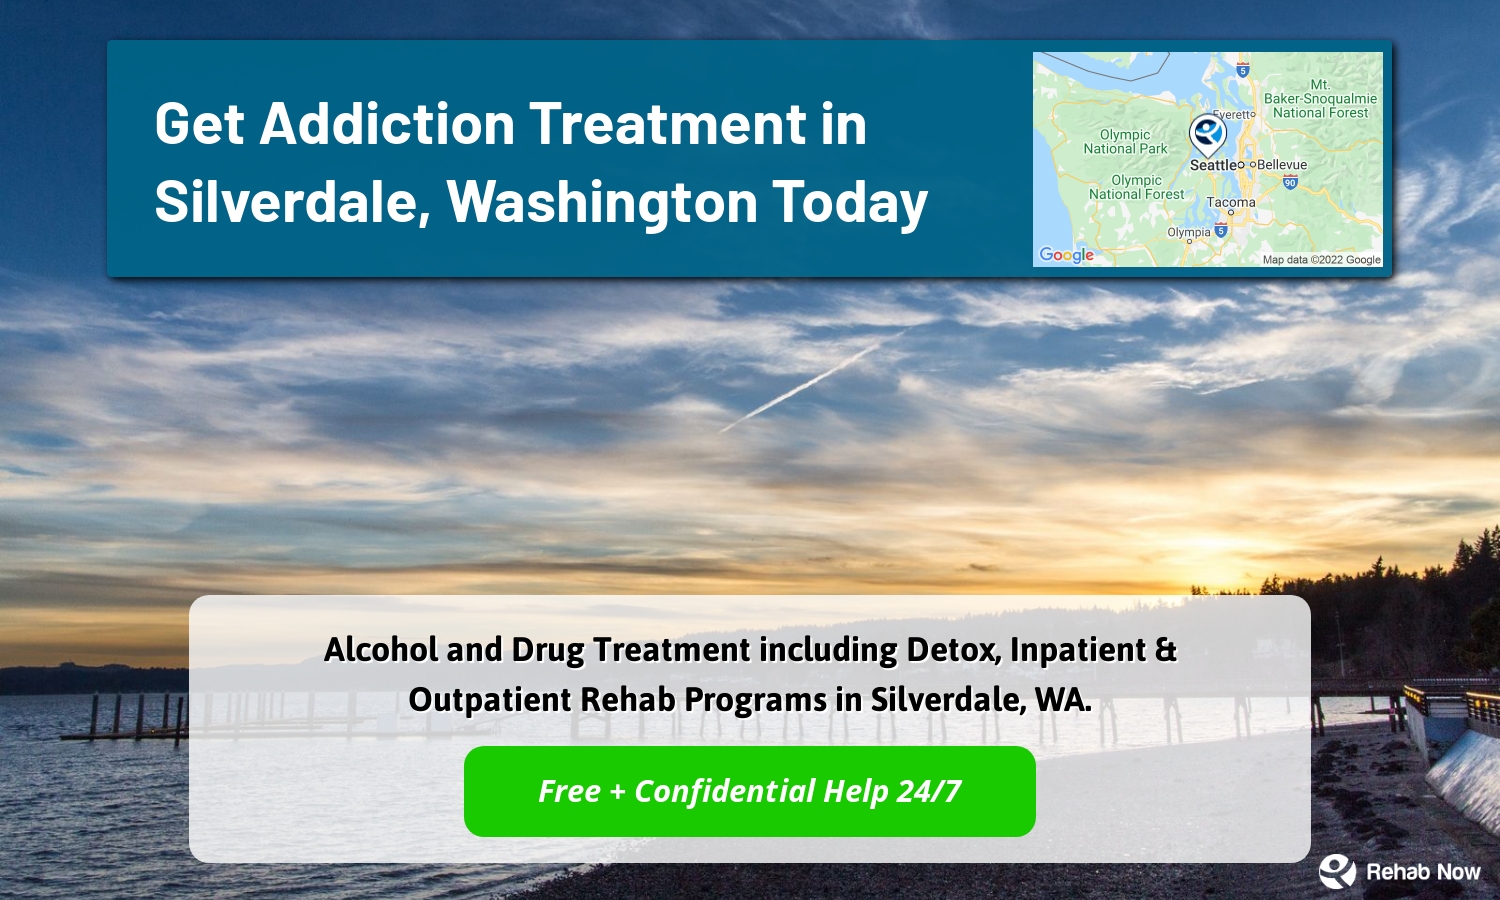 Alcohol and Drug Treatment including Detox, Inpatient & Outpatient Rehab Programs in Silverdale, WA.